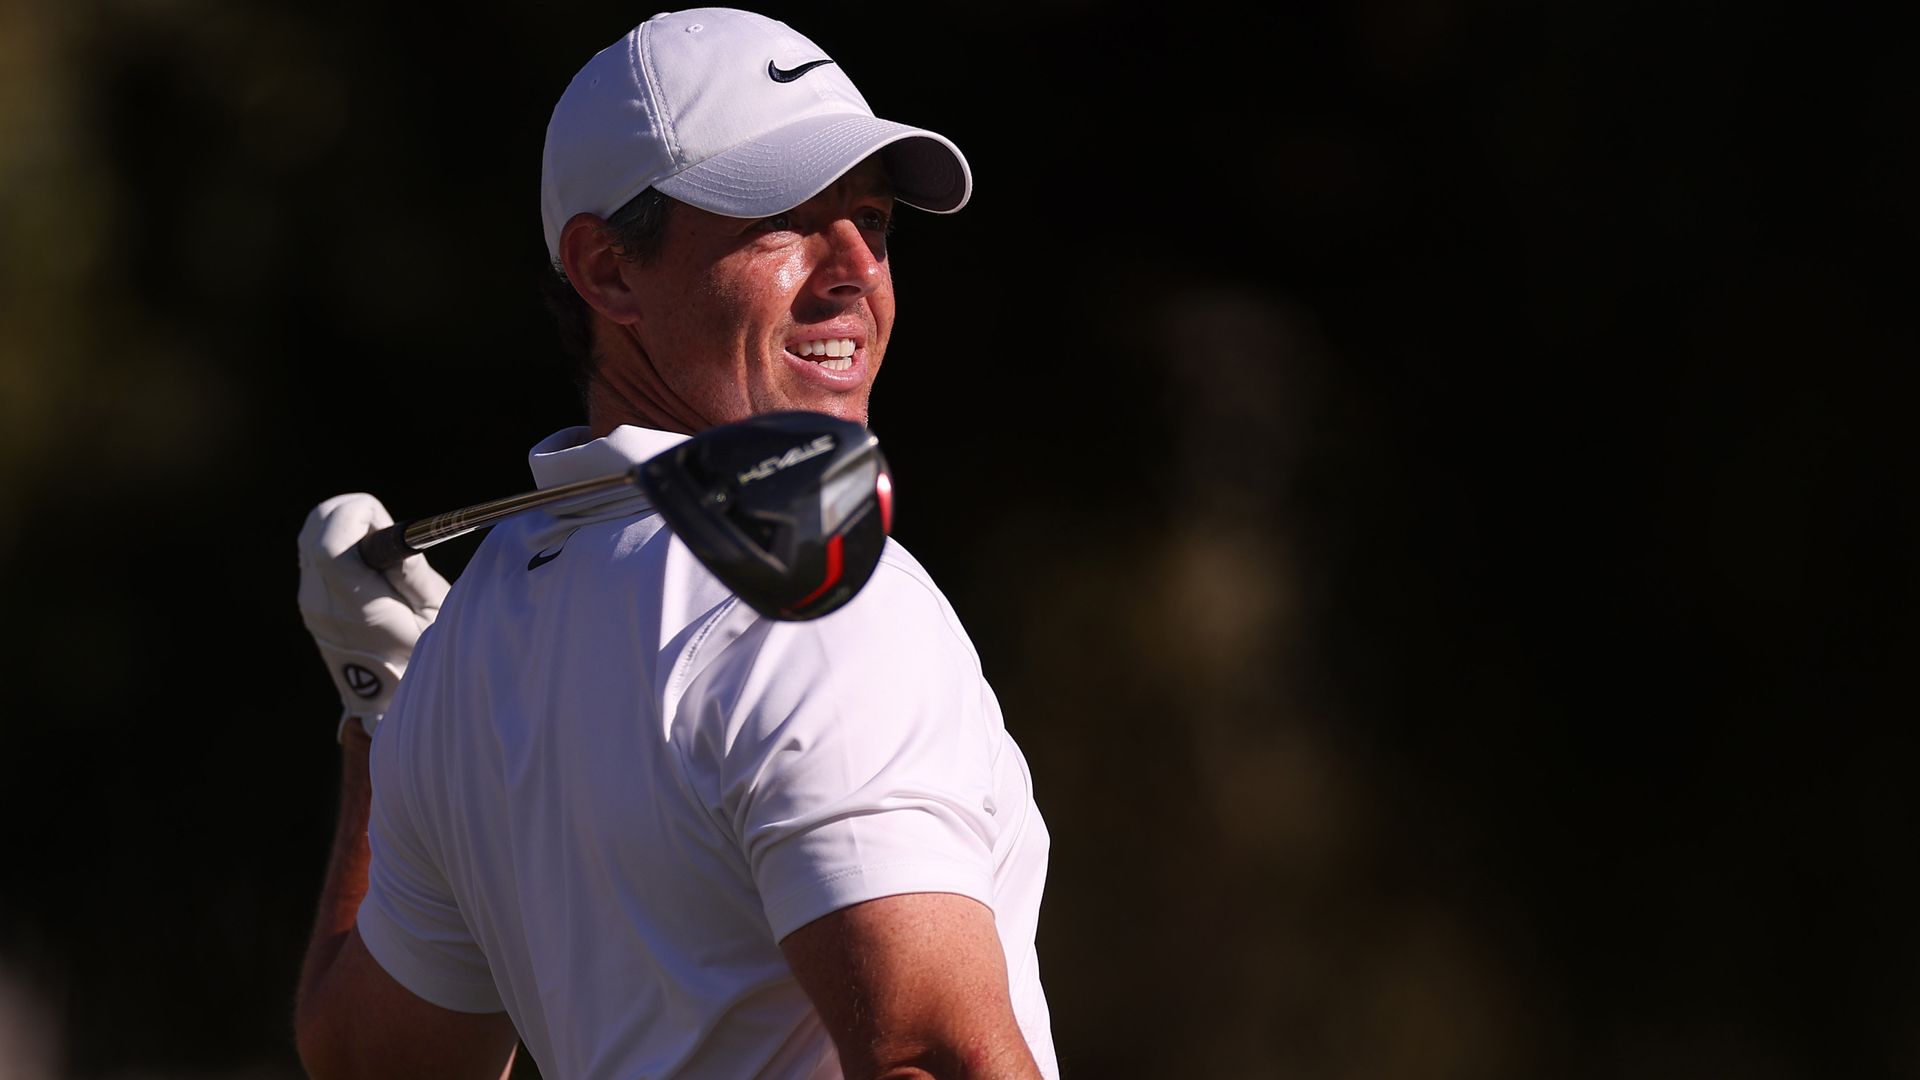 McIlroy seven off the lead as Scheffler takes control at Phoenix Open